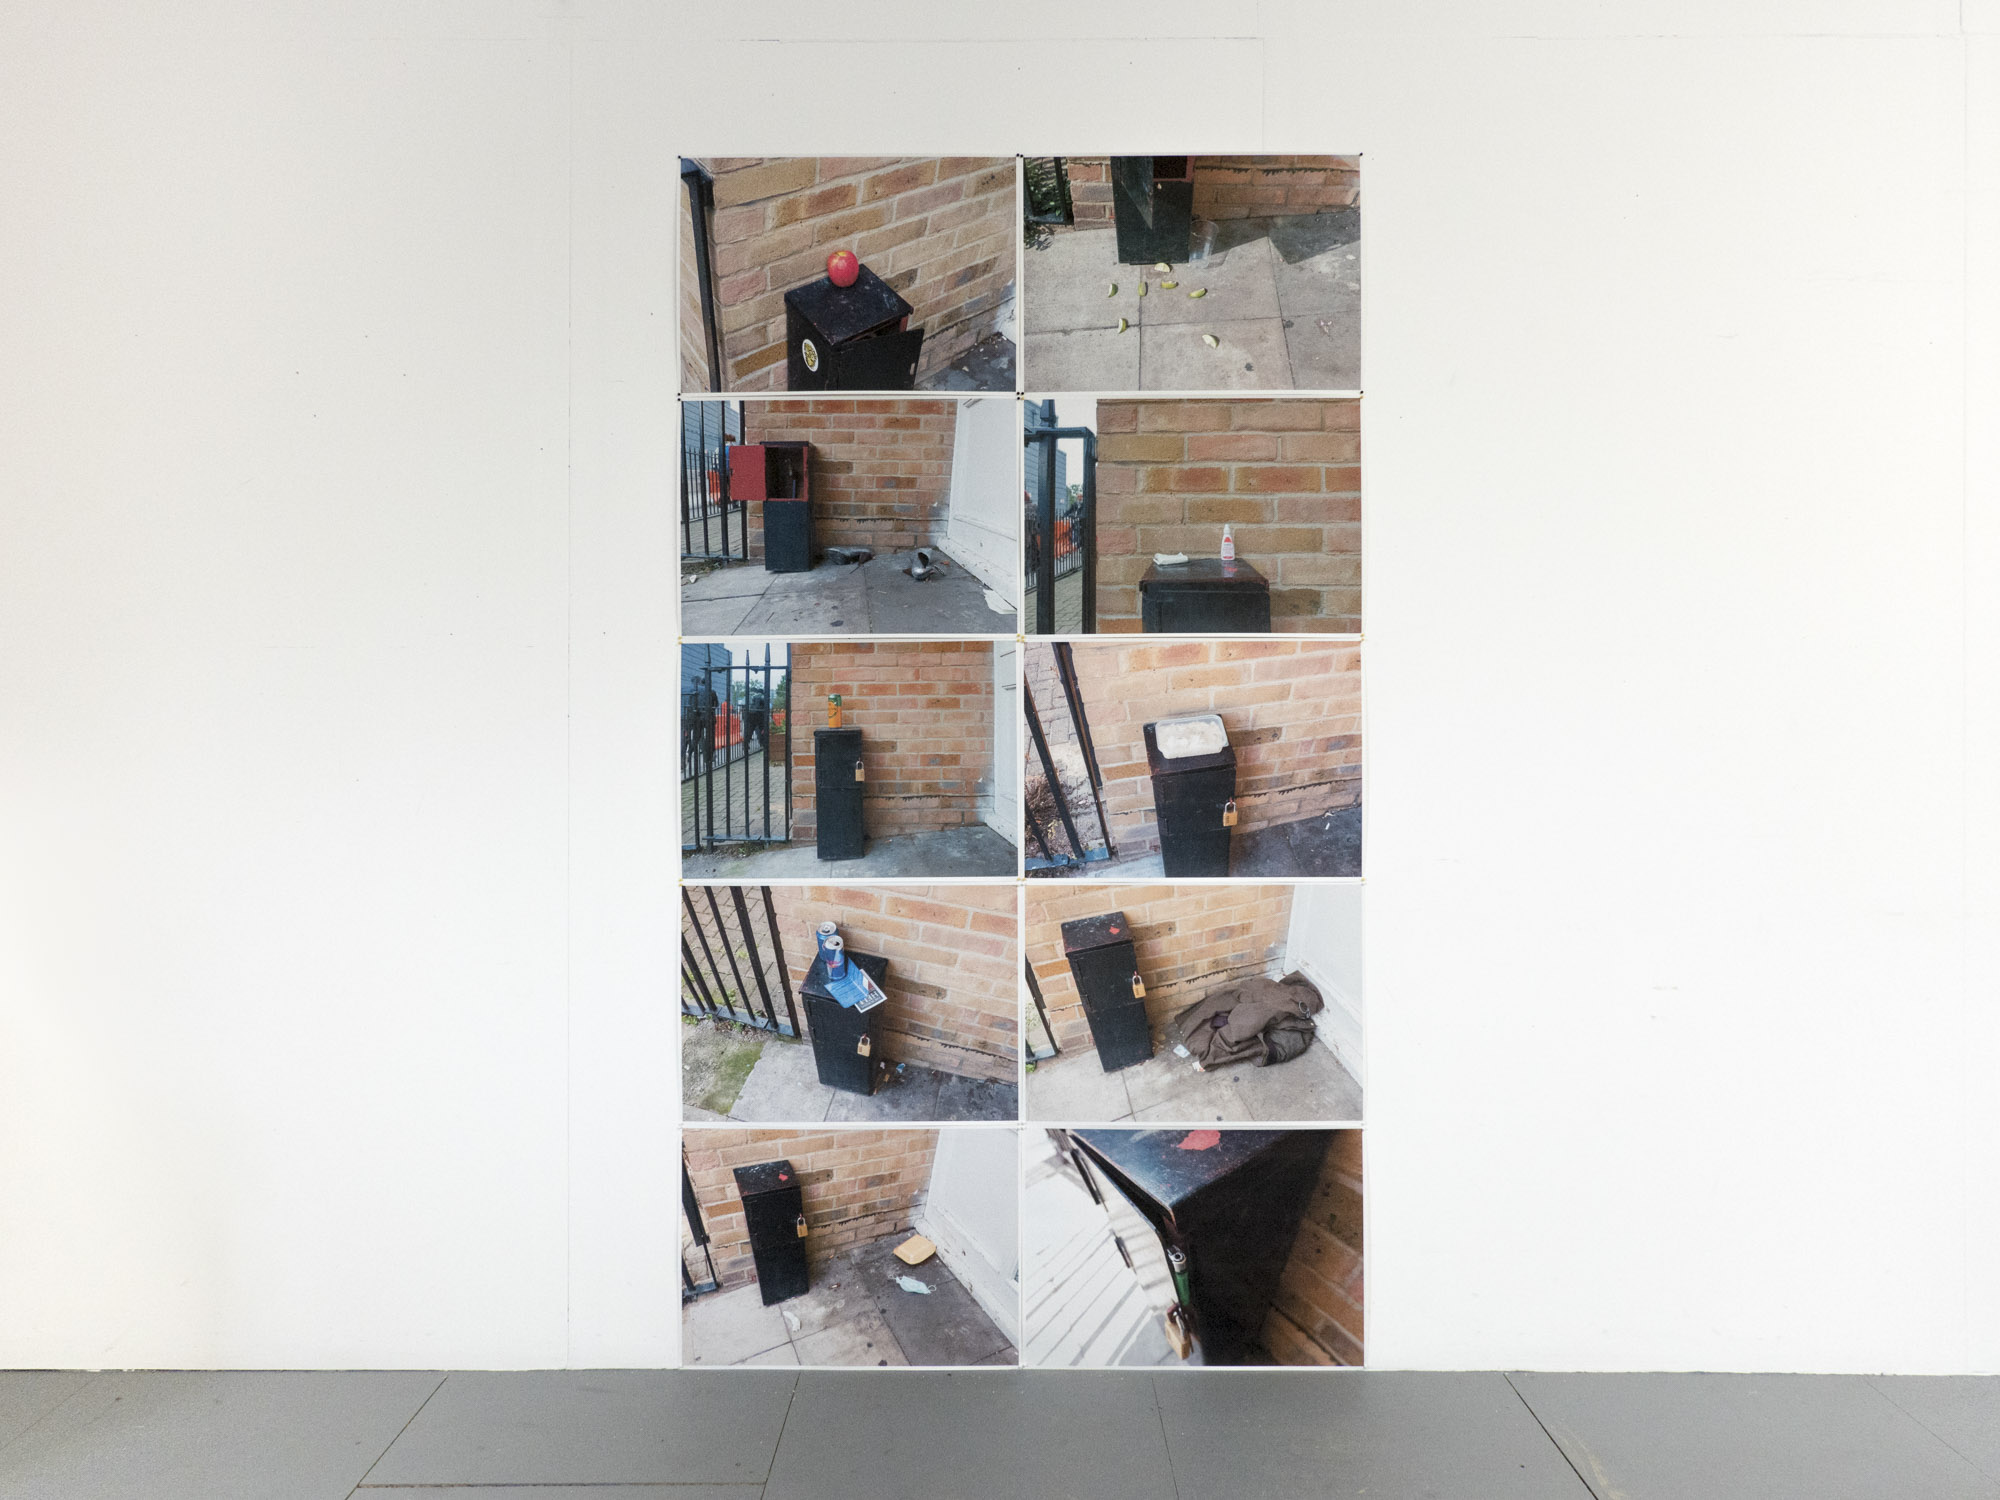 eight photographs arranged in a two by five vertical grid depicting detritus left by unknown persons in a doorway